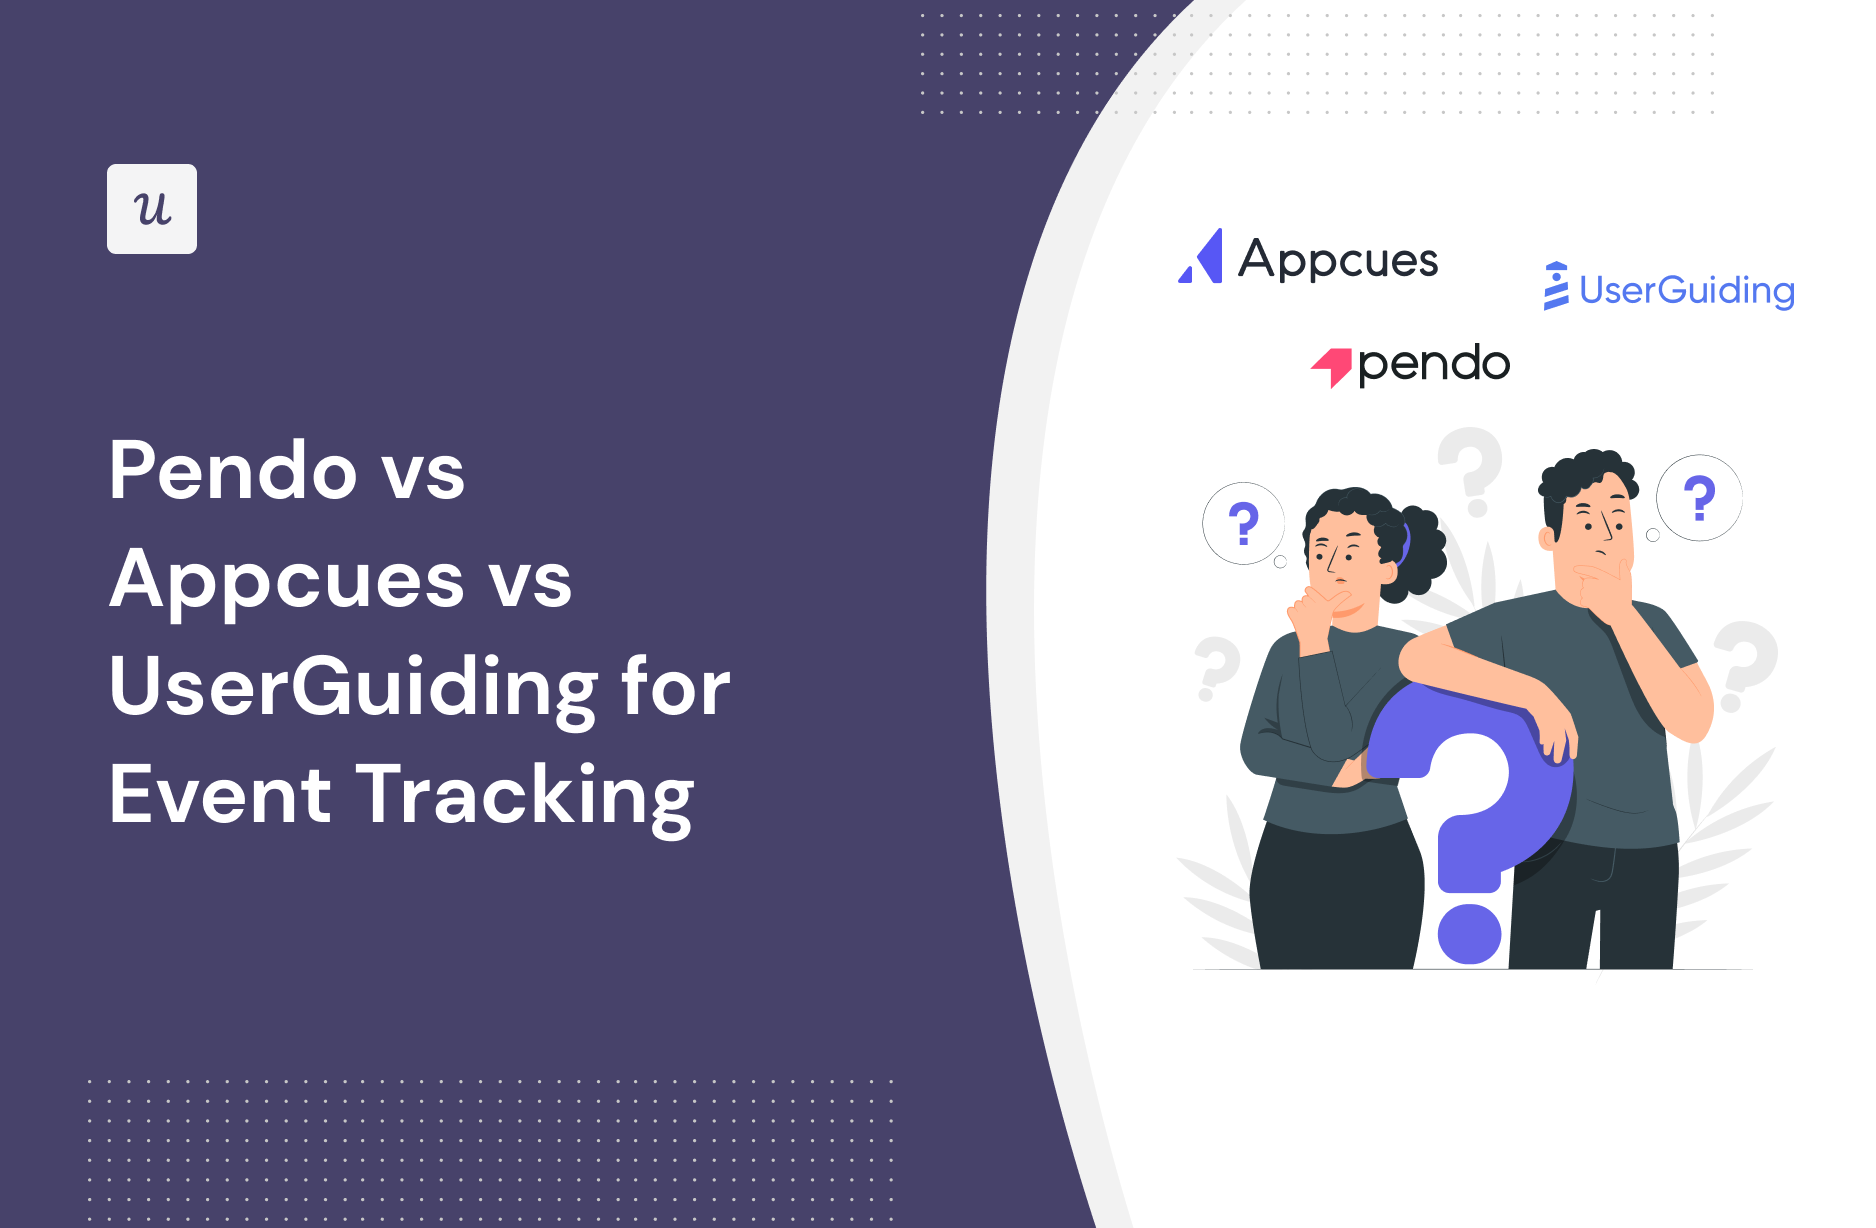 Pendo vs Appcues vs UserGuiding for Event Tracking